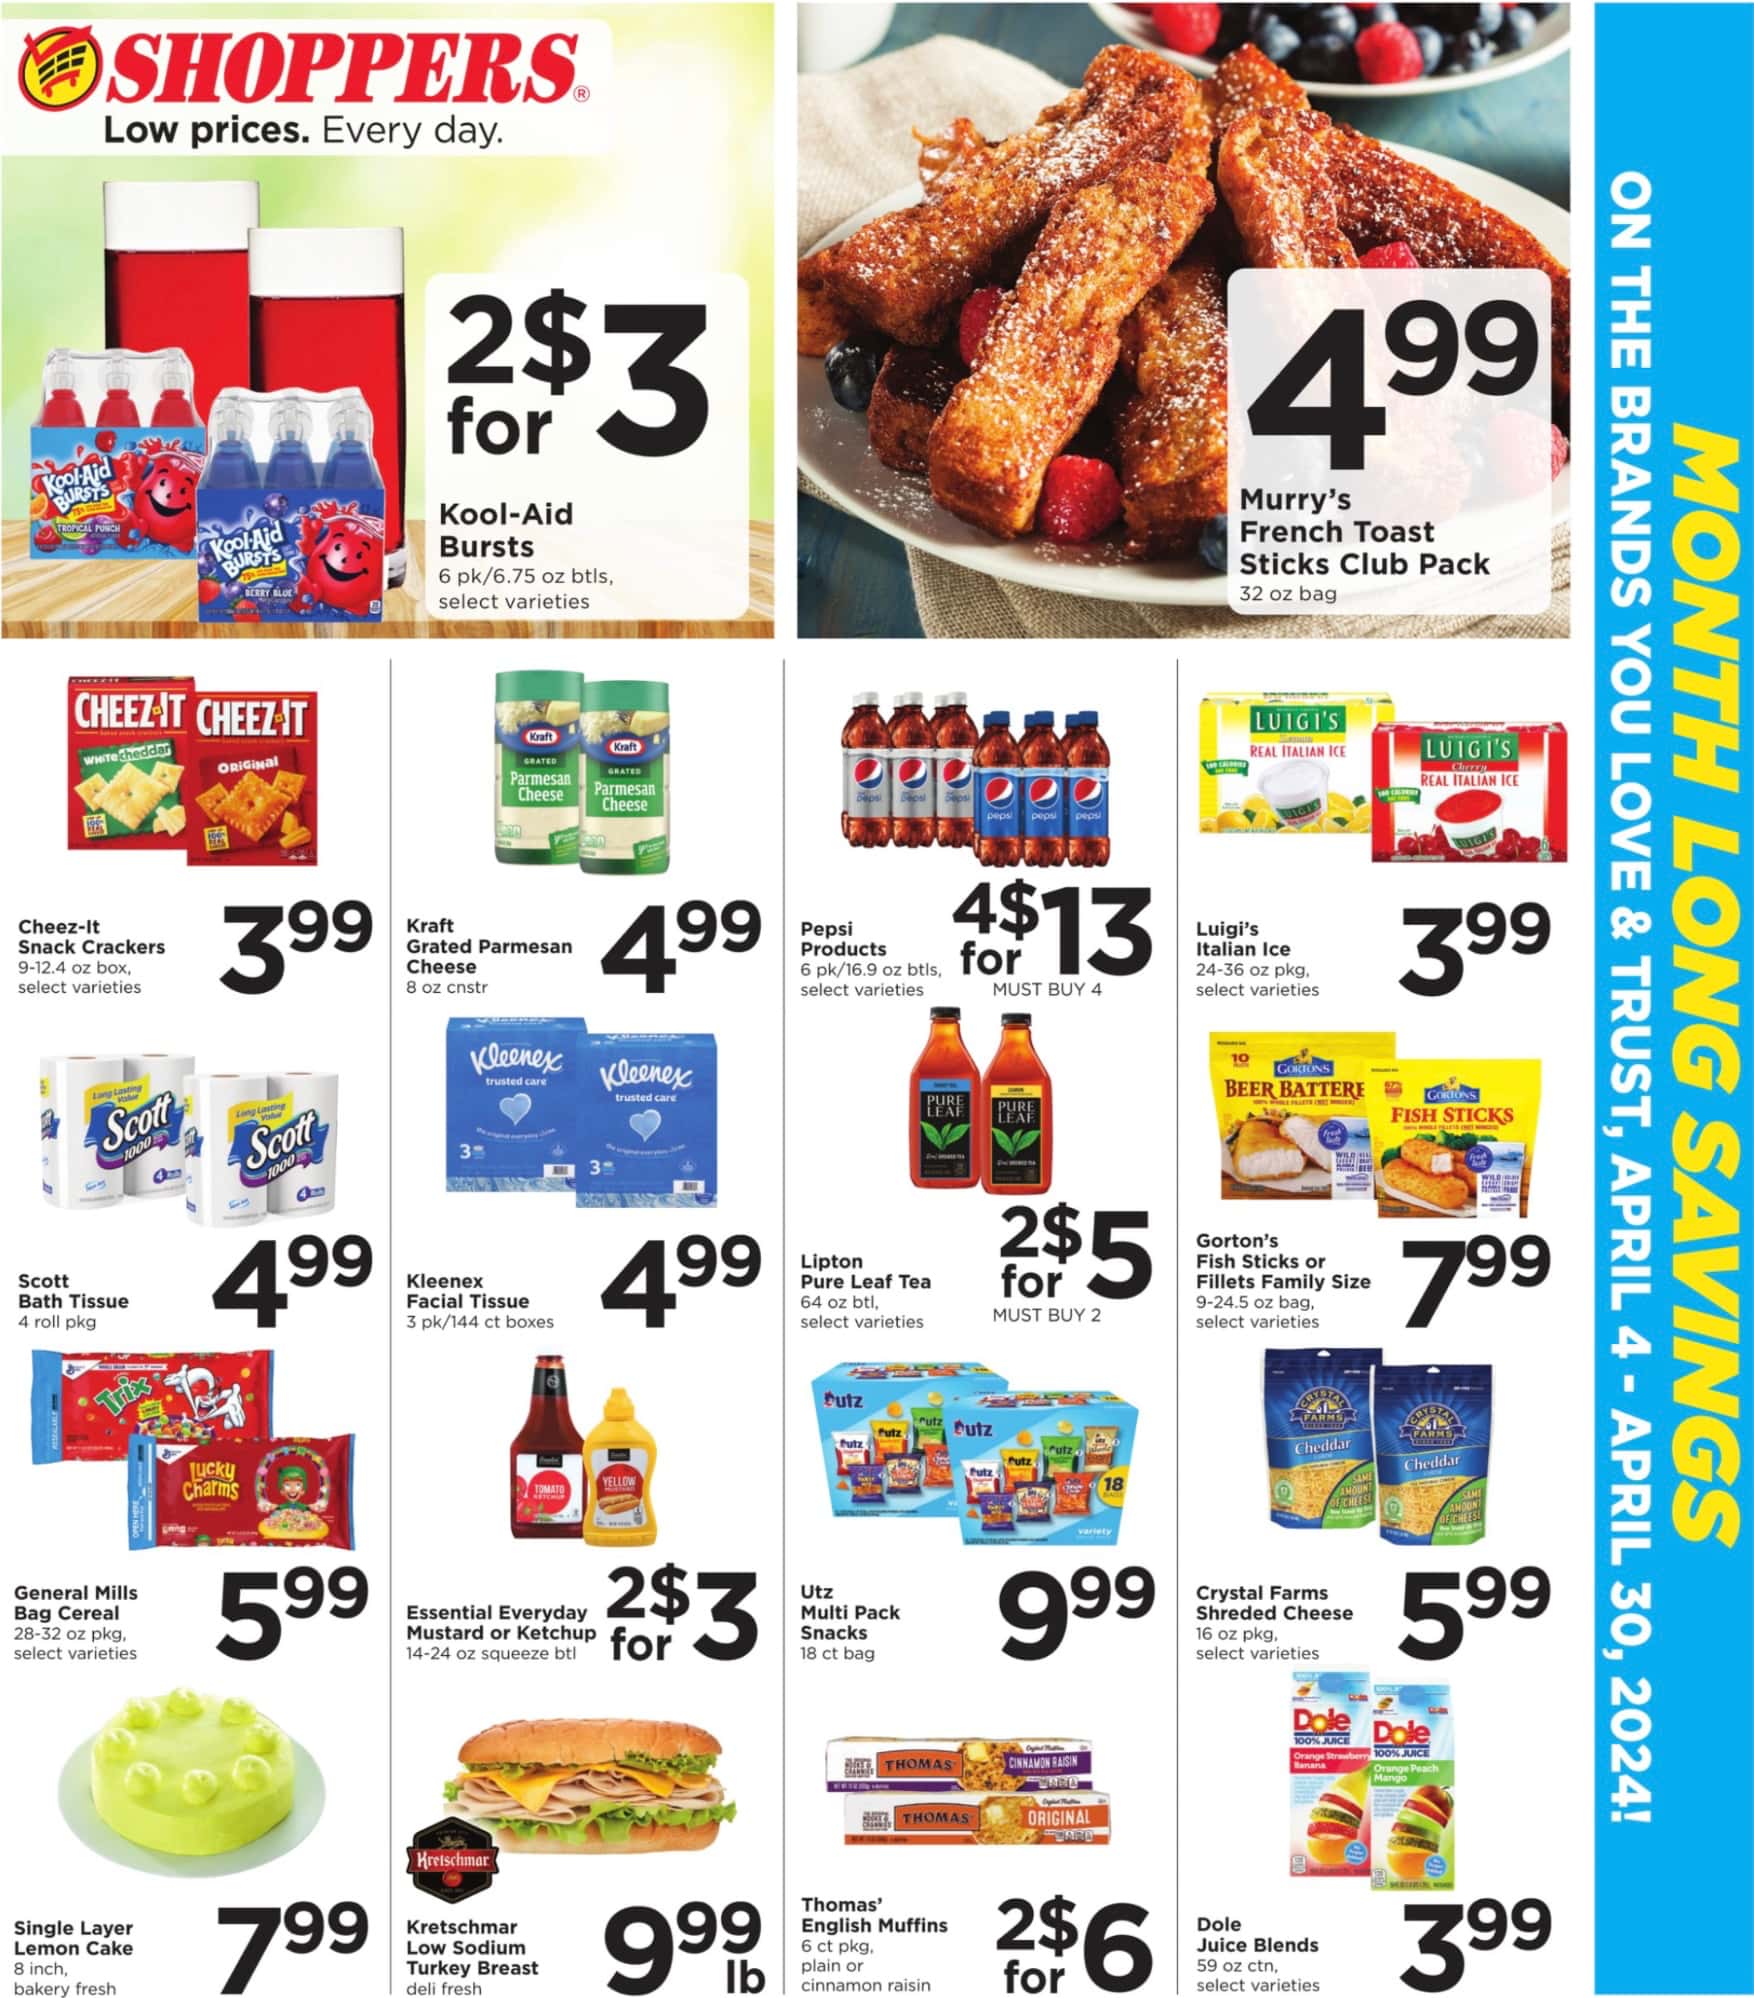 Shoppers_weekly_ad_040524_01